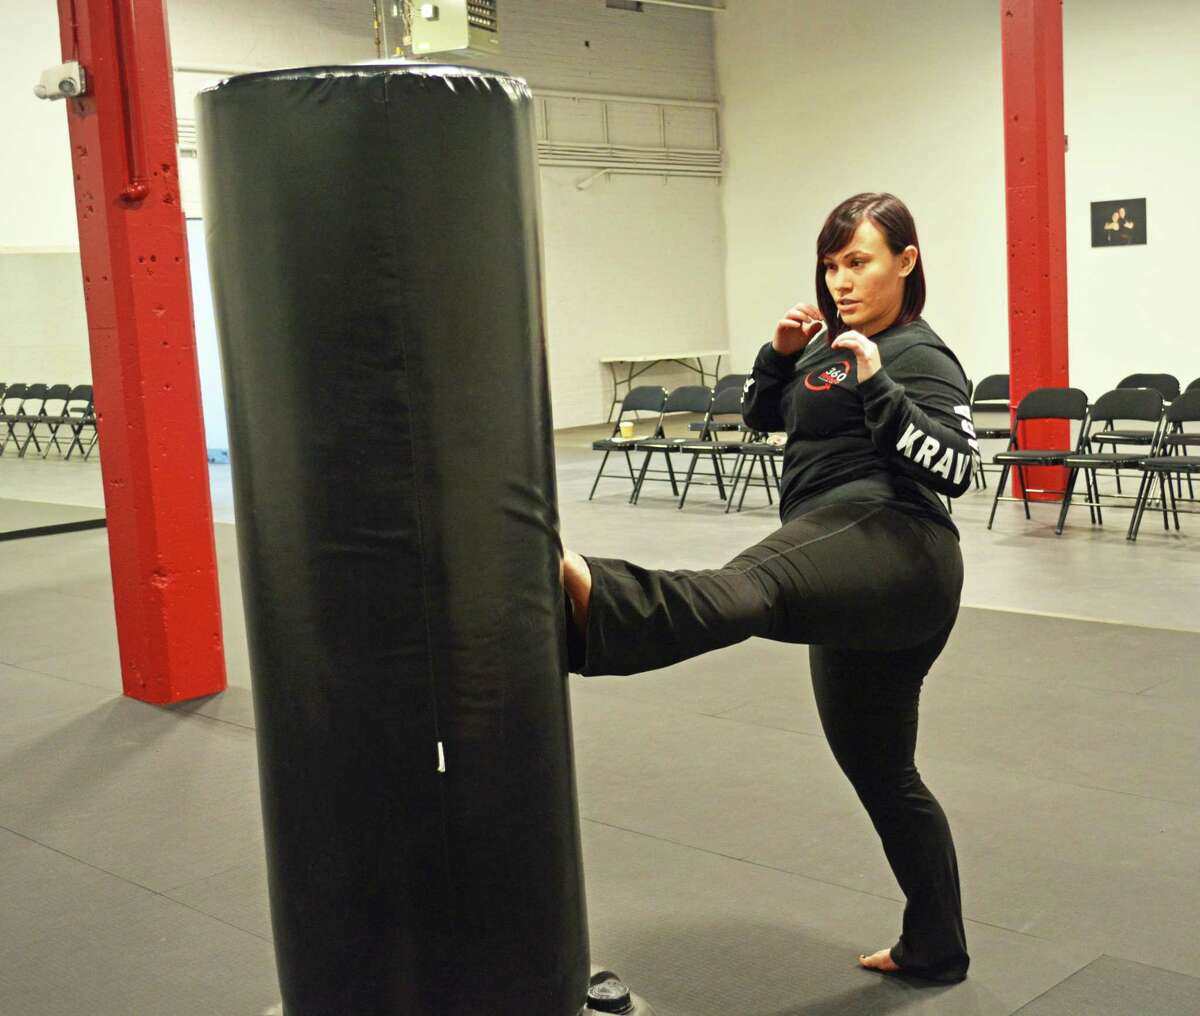 Opening her own studio has been Kayla Stomberg’s dream since she was 16. In January, the 29-year-old Colchester resident launched 360 Defense Martial Arts on Main Street in Middletown, a woman-owned business in a typically male-dominated field. She is hoping to empower other women and girls of all ages just as martial arts has done for her.